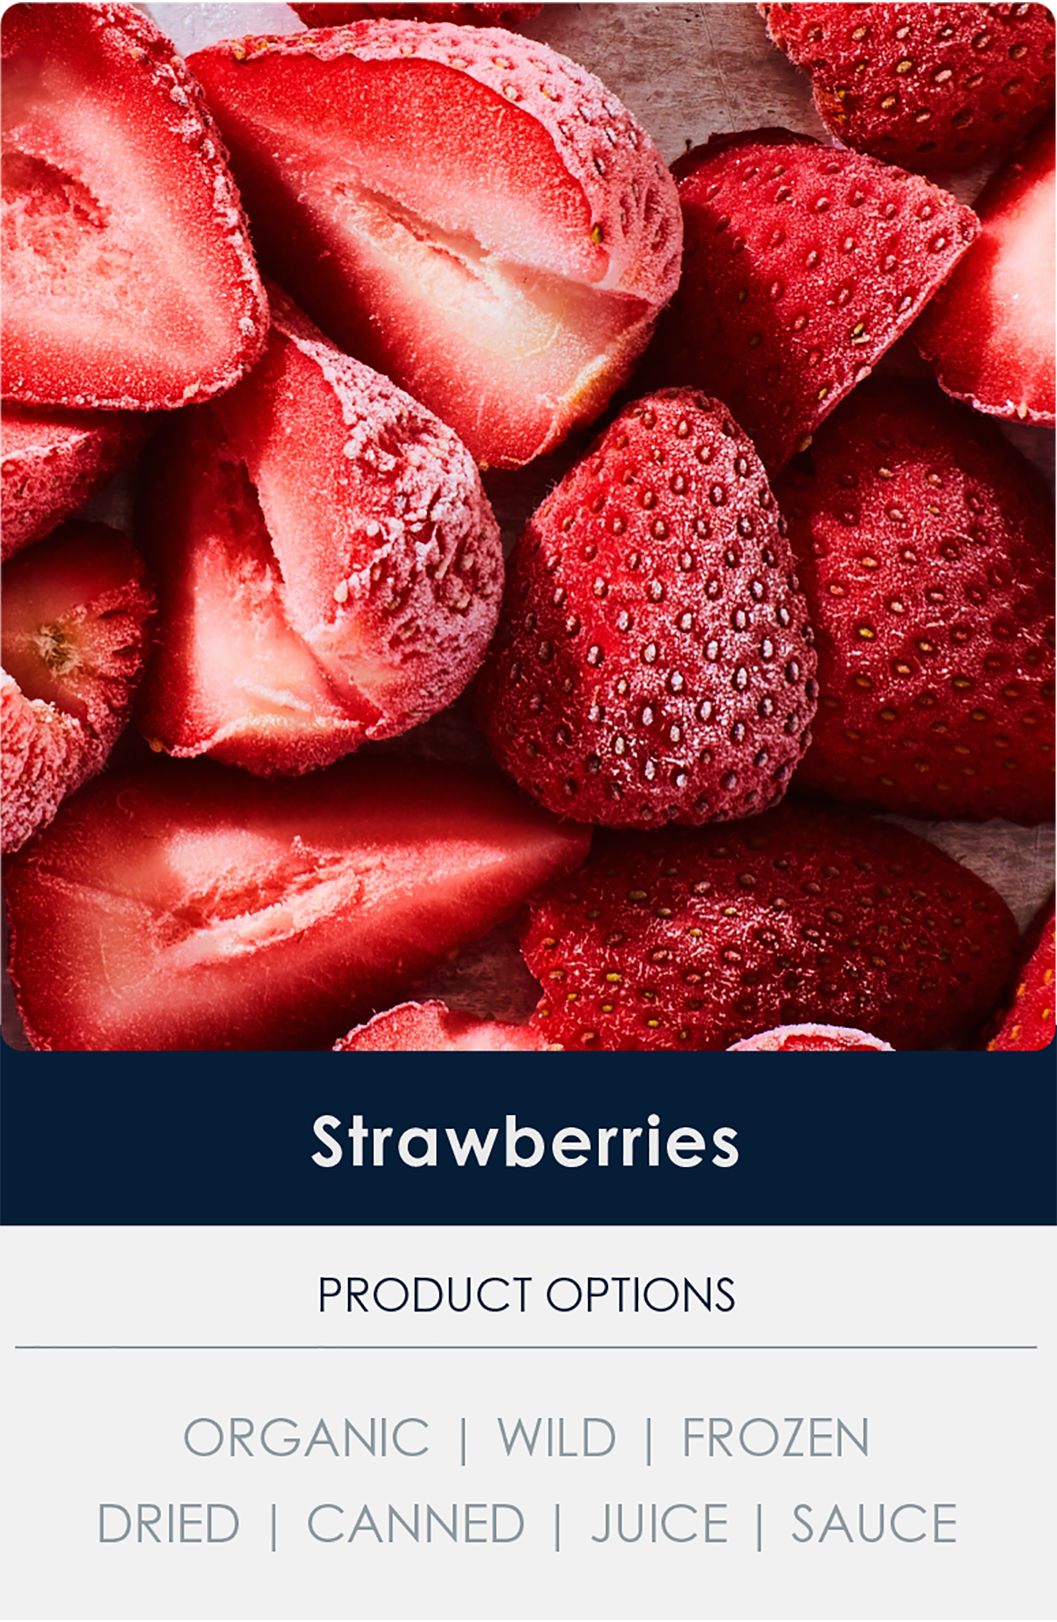 Photos of strawberries with text below listing product options: organic, wild, frozen, dried, canned, juice, sauce.